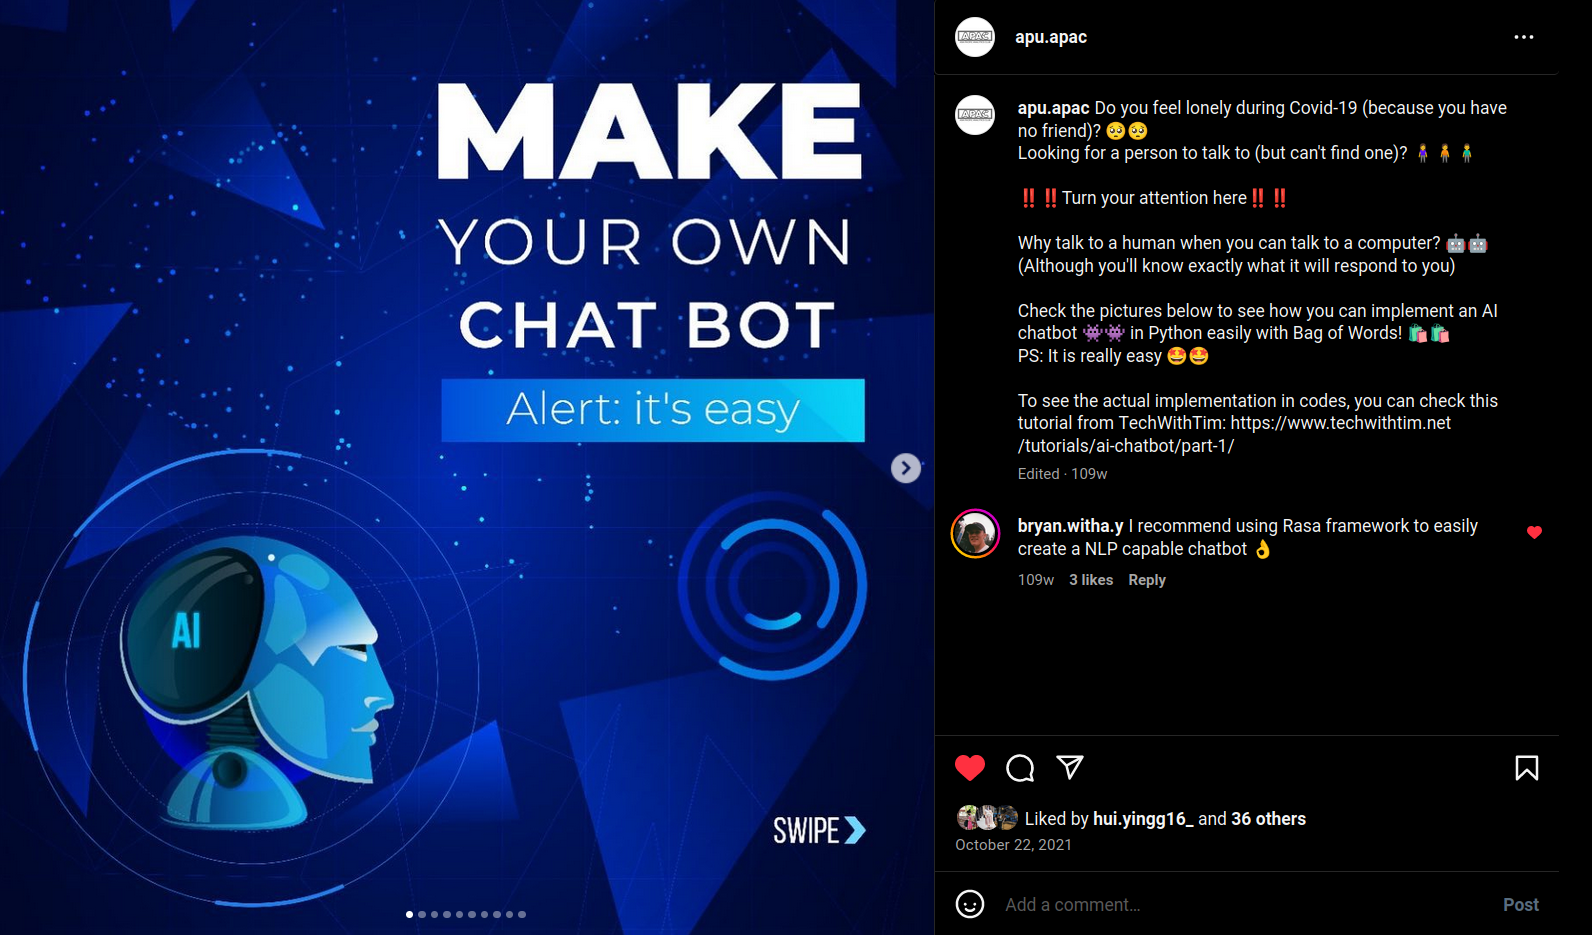 One of my PR posters for chatbot